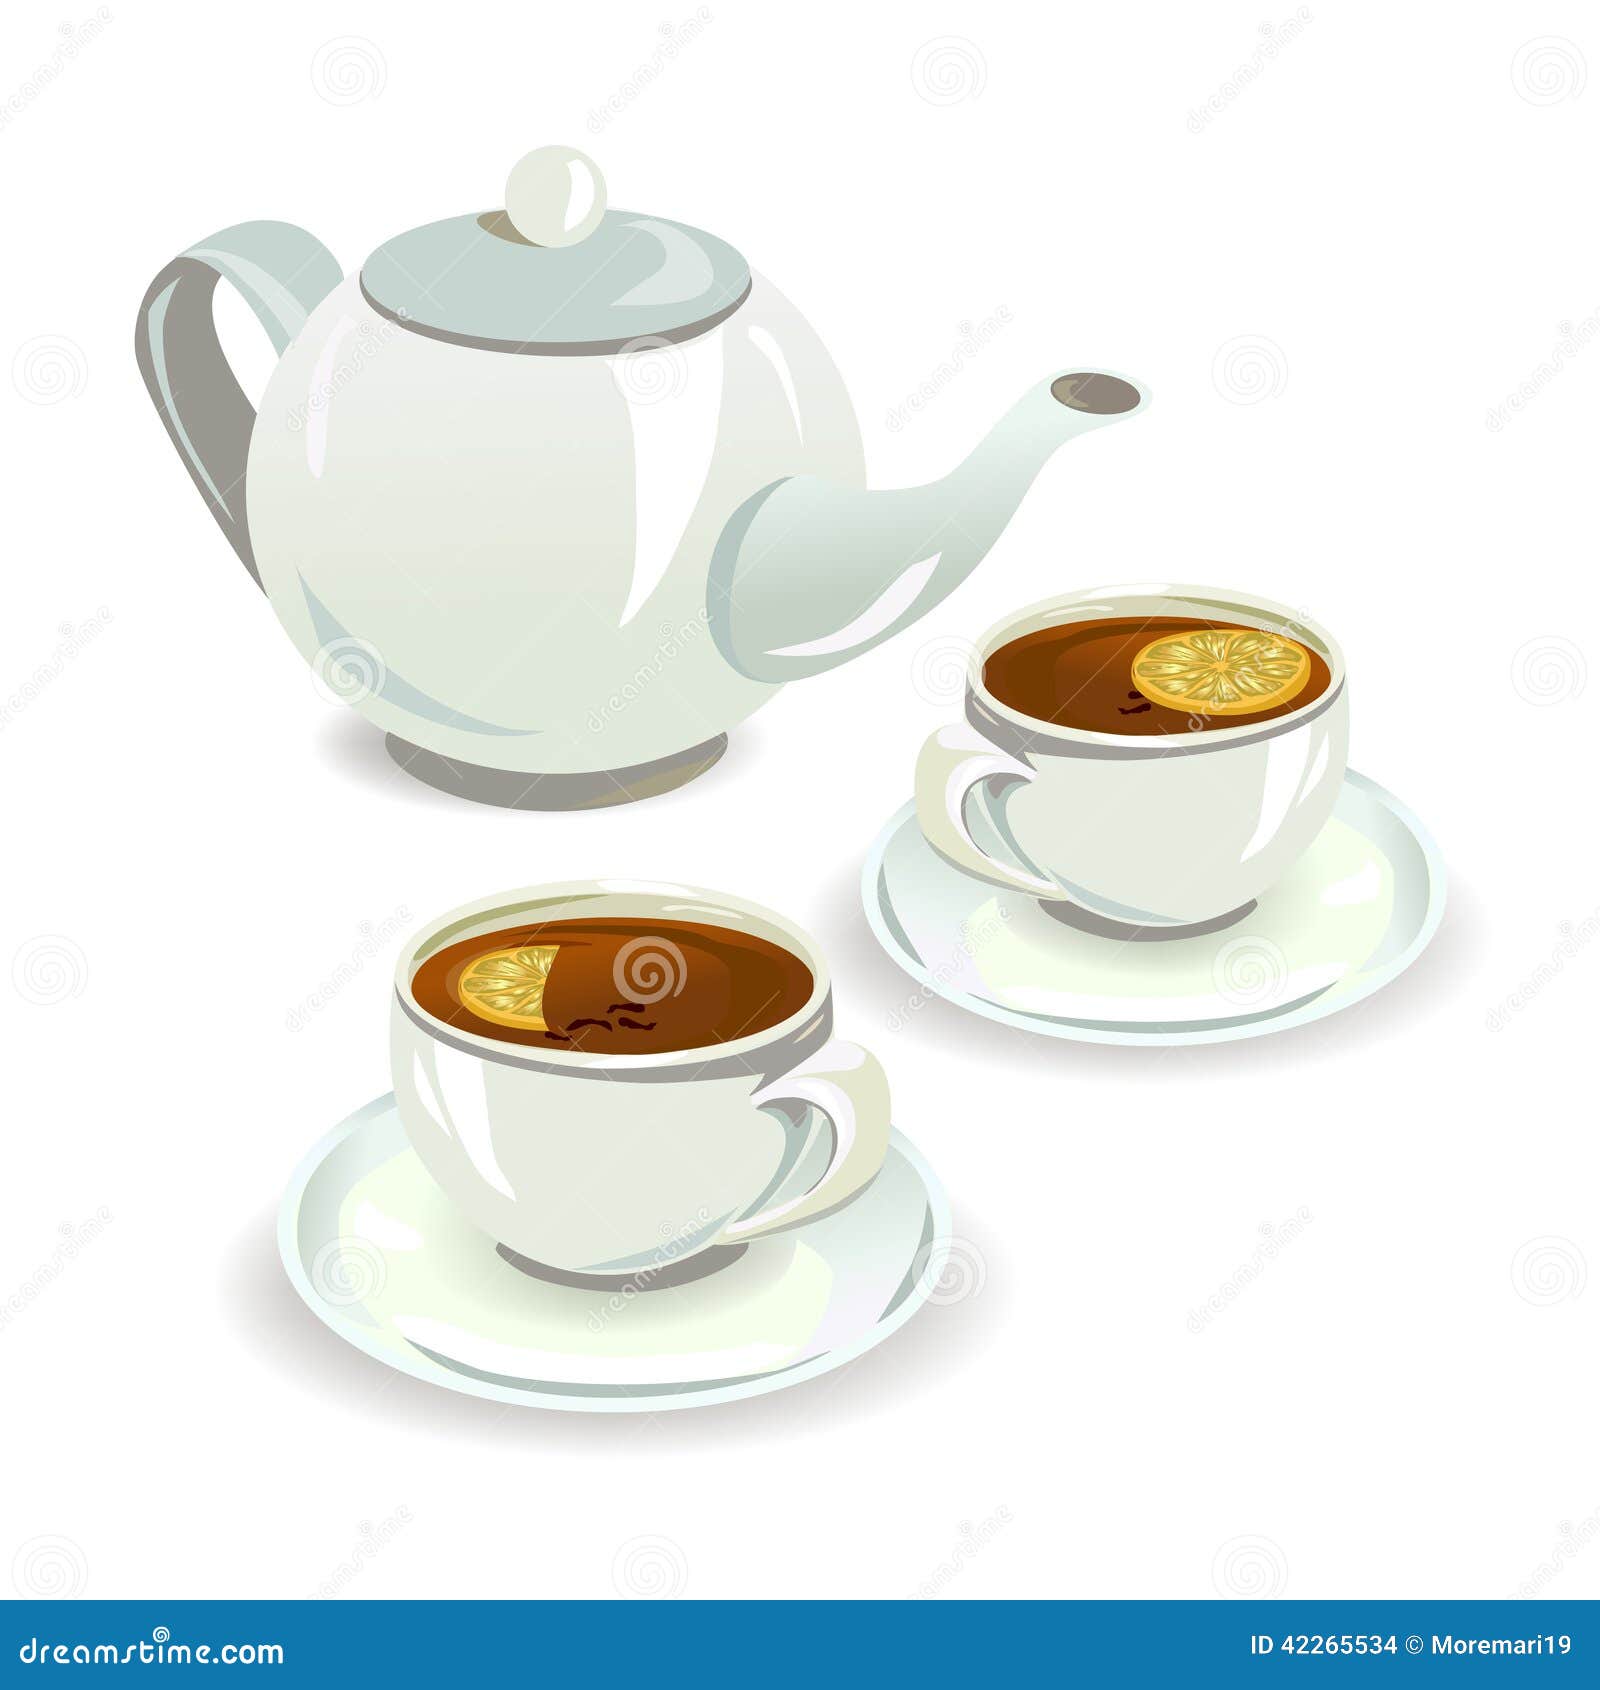 Cups with tea and teapot stock vector. Illustration of glass - 42265534